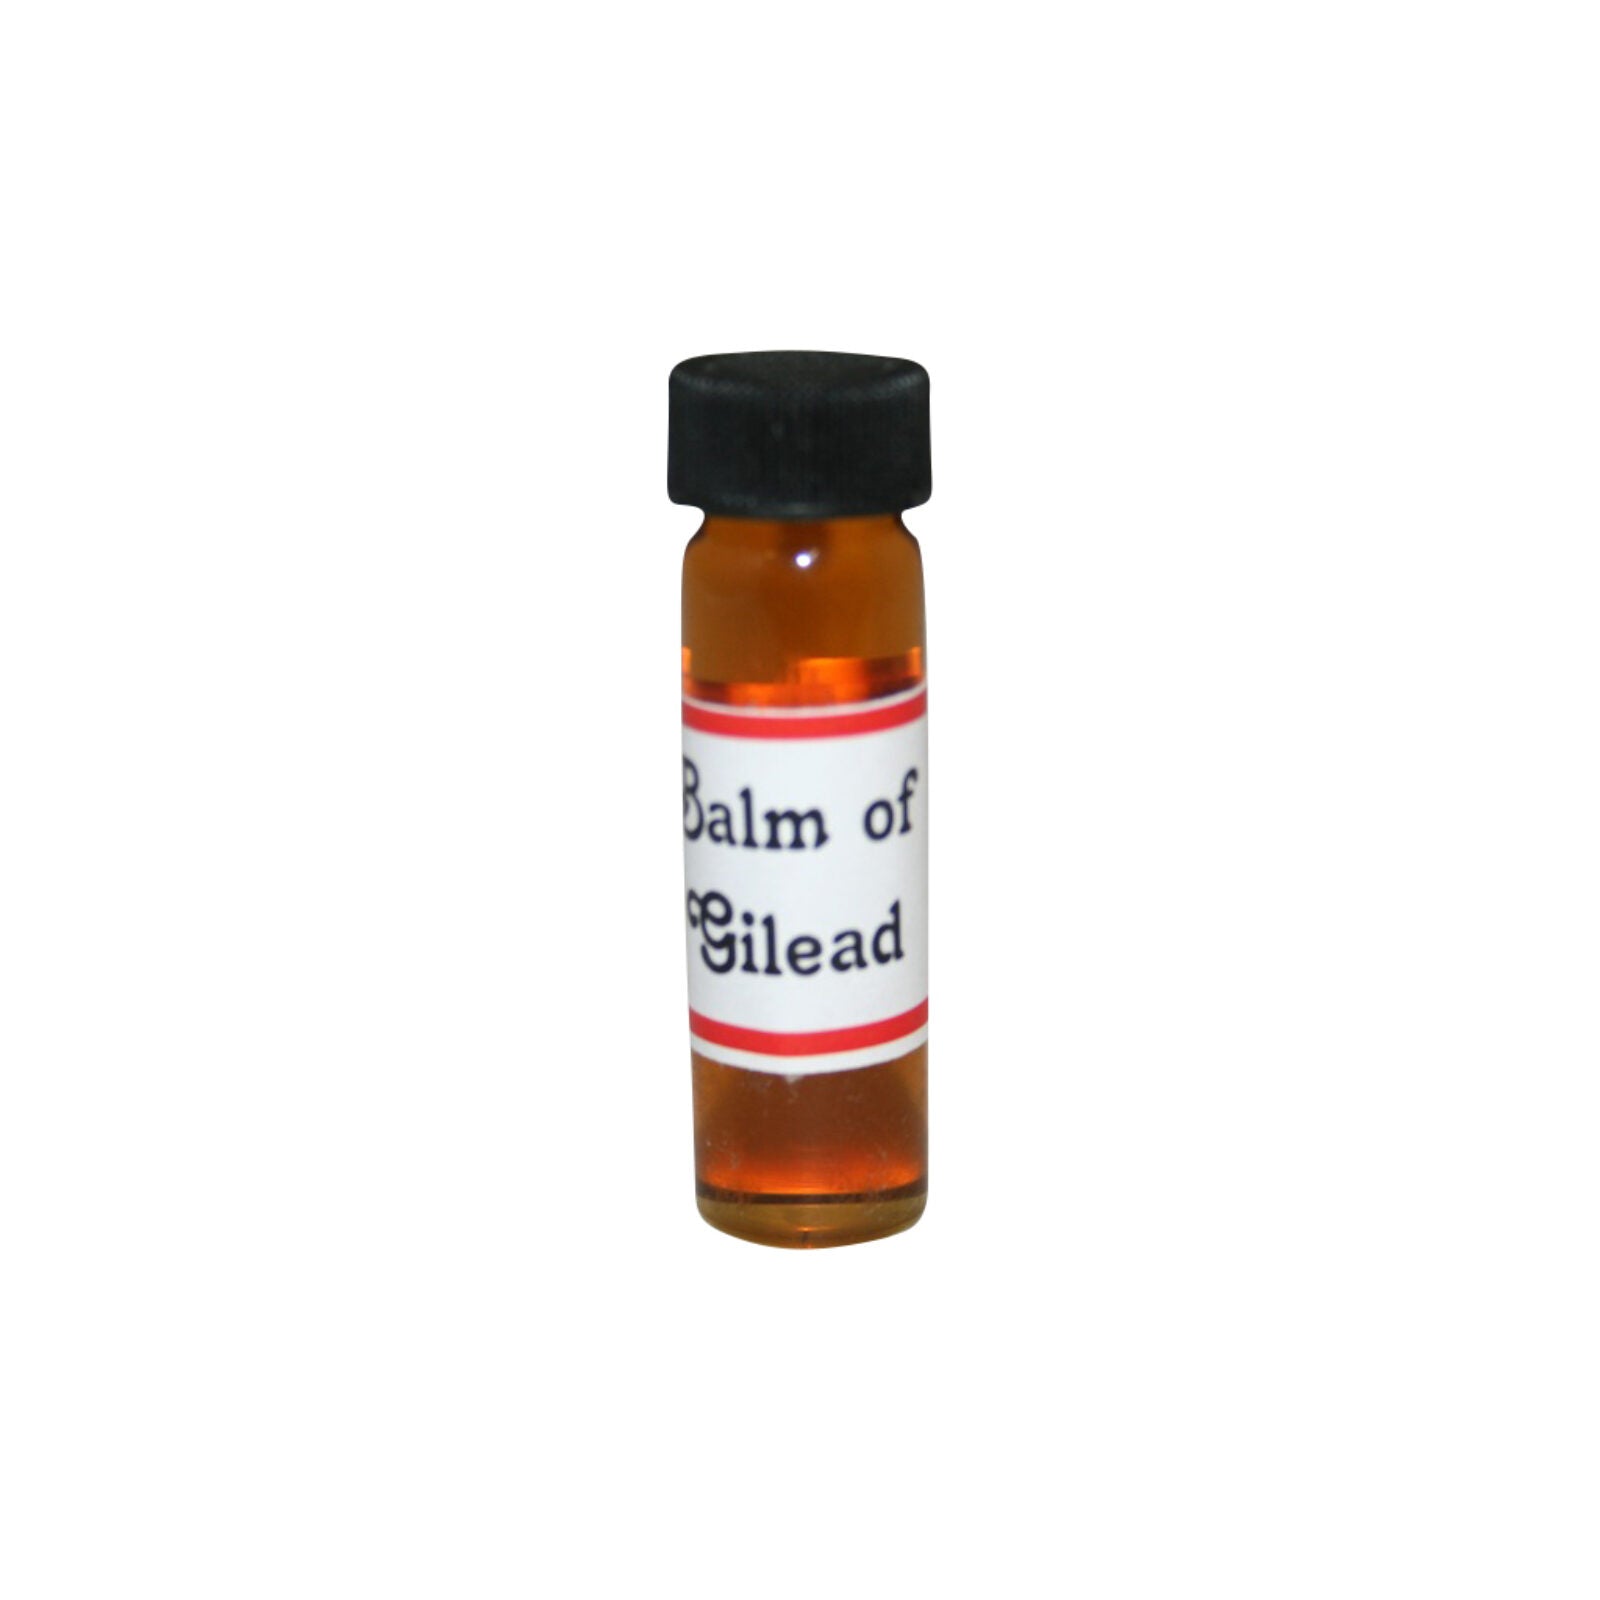 Balm of Gilead Oil Check My Vibes